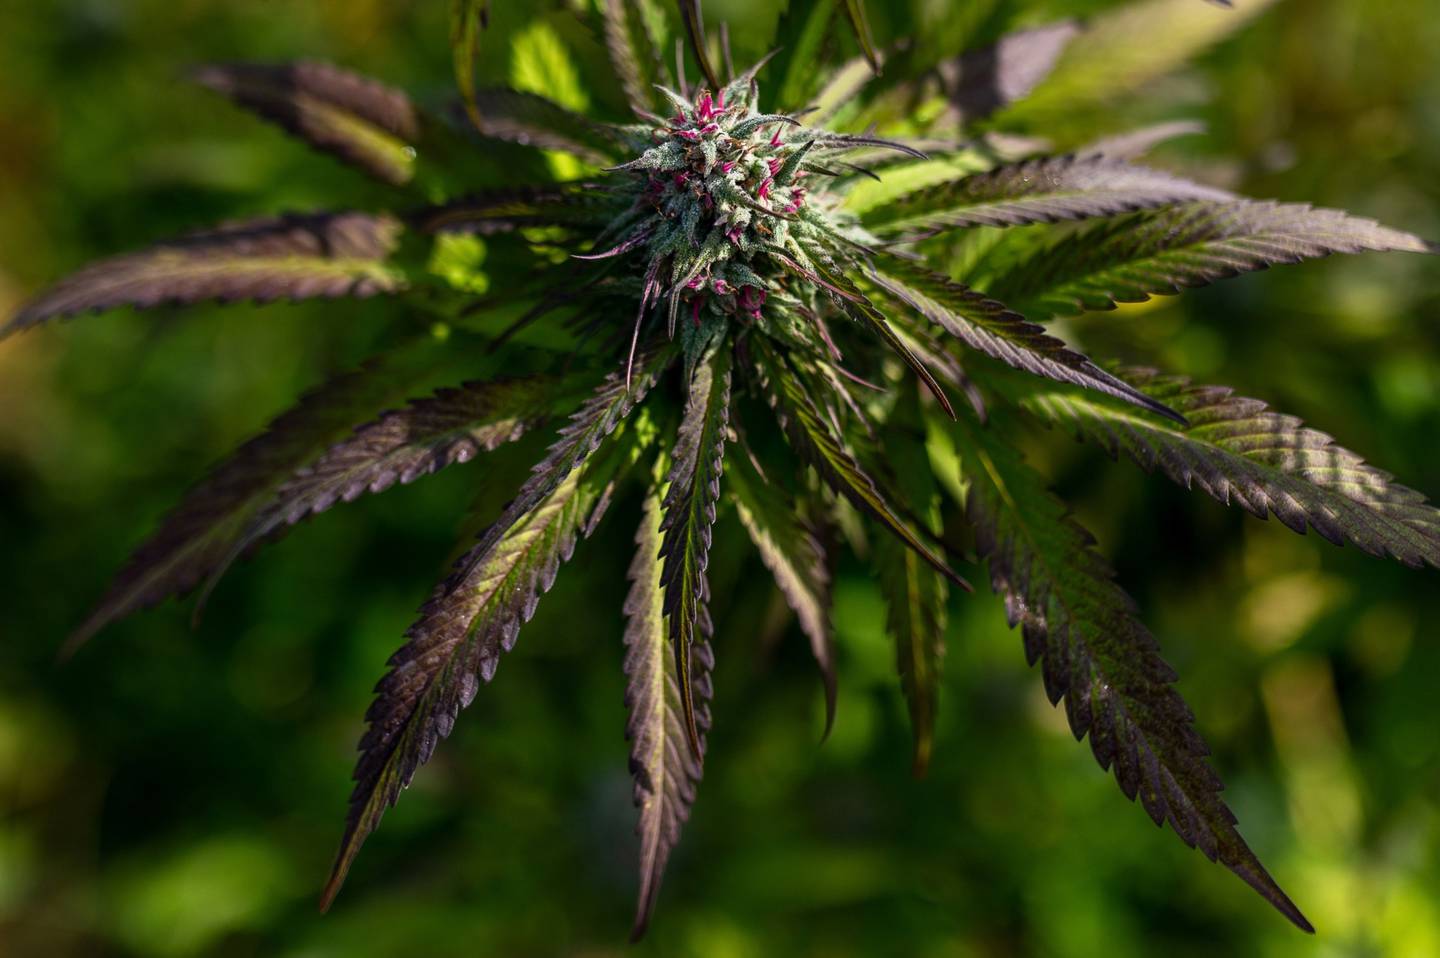 A cannabis plant growing in the Dabble Cannabis Co. plantation near Duncan in British Columbia.